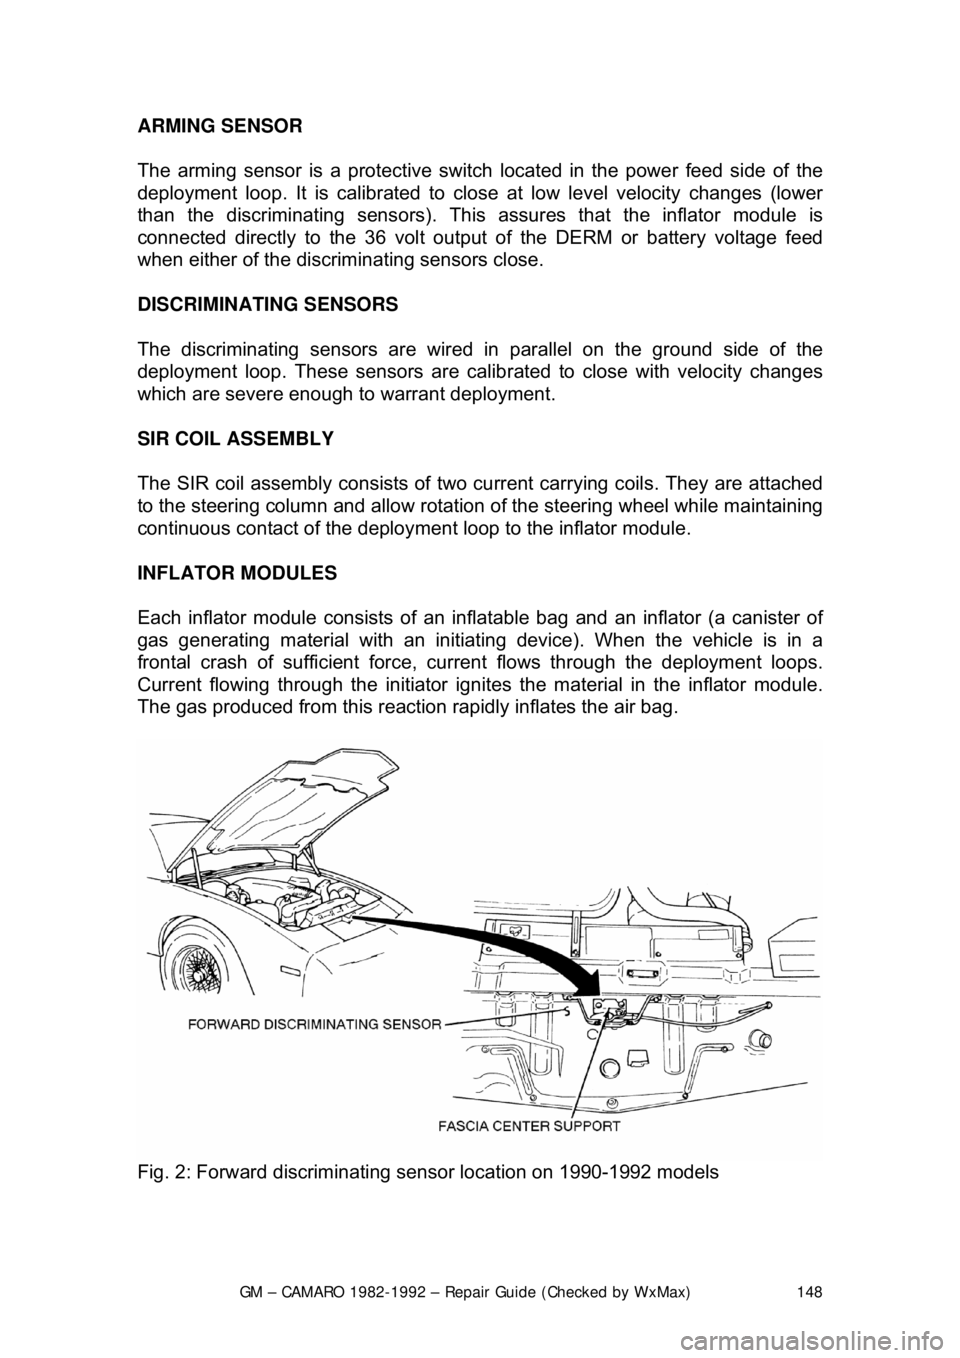 CHEVROLET CAMARO 1982  Repair Guide 
GM – CAMARO 1982-1992 – Repair Guide (Checked by WxMax) 148
ARMING SENSOR  
The arming sensor is a protective switch
 located in the power feed side of the 
deployment loop. It is calibrated to c